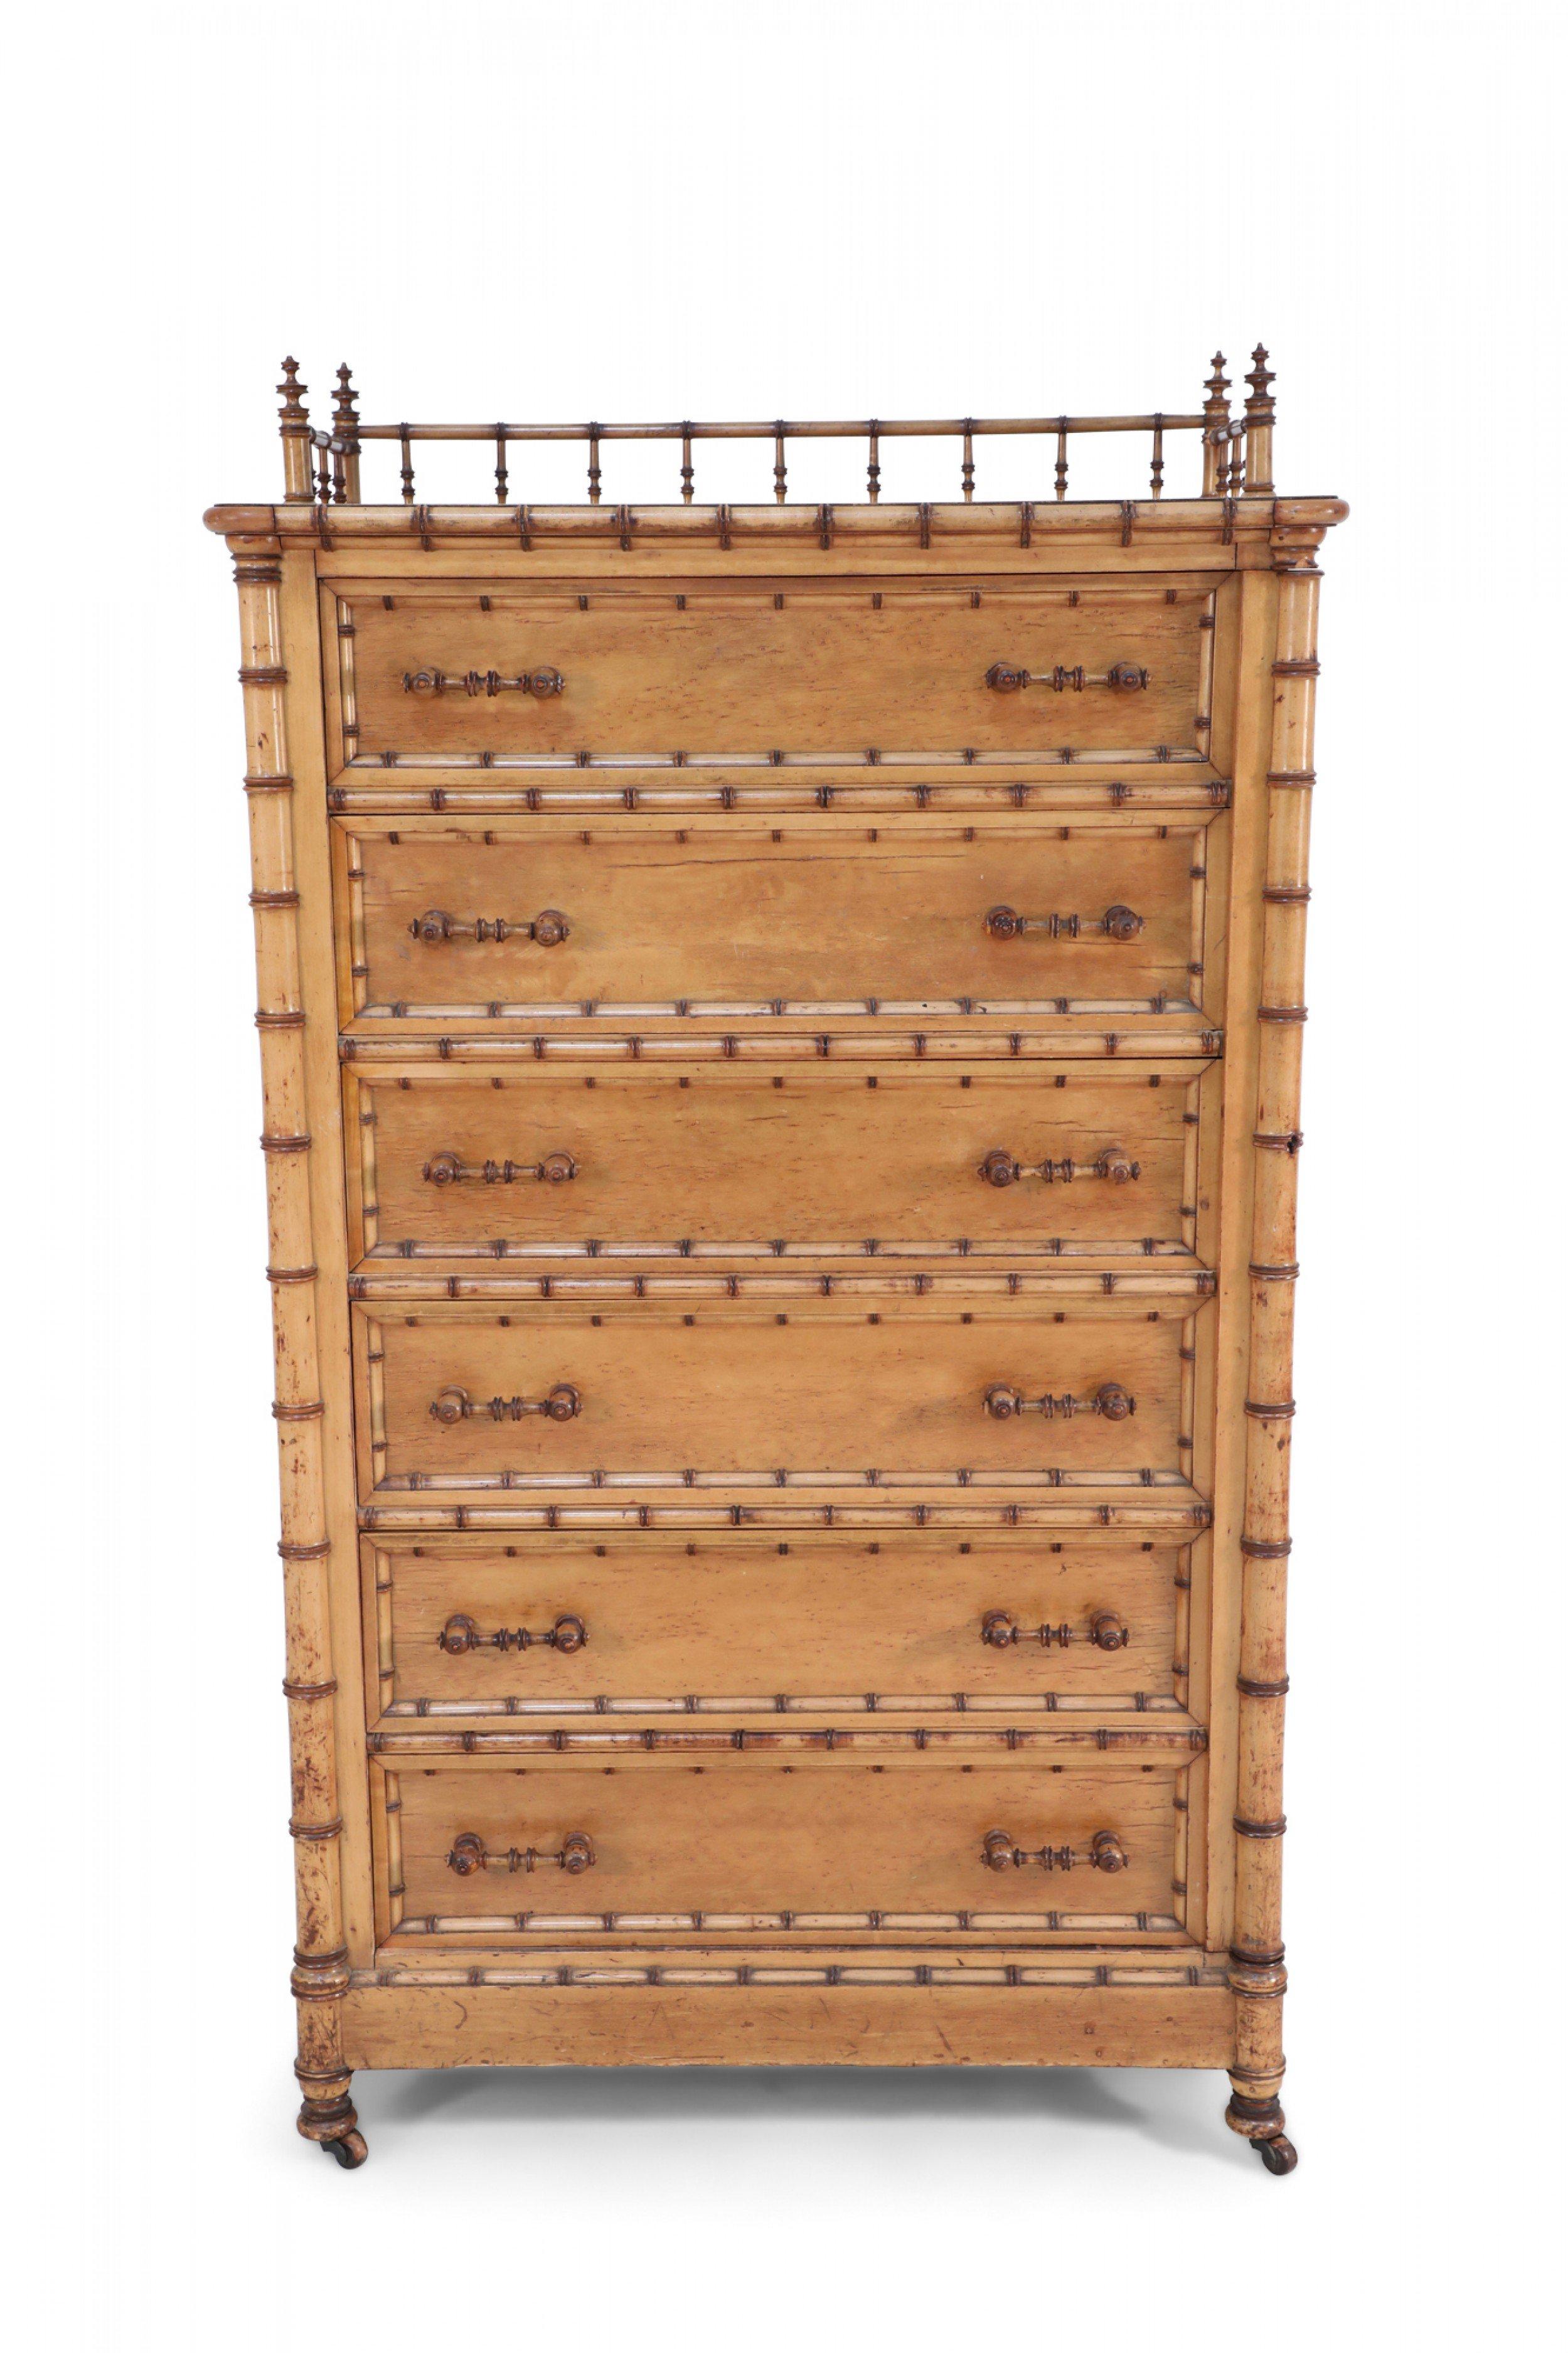 American Victorian Aesthetic Movement amber stained birdseye maple faux bamboo 6-drawer lock side chest with a partial gallery top, paneled sides, and turned wooden handles resting on brass casters. (R.J. Horner).
  